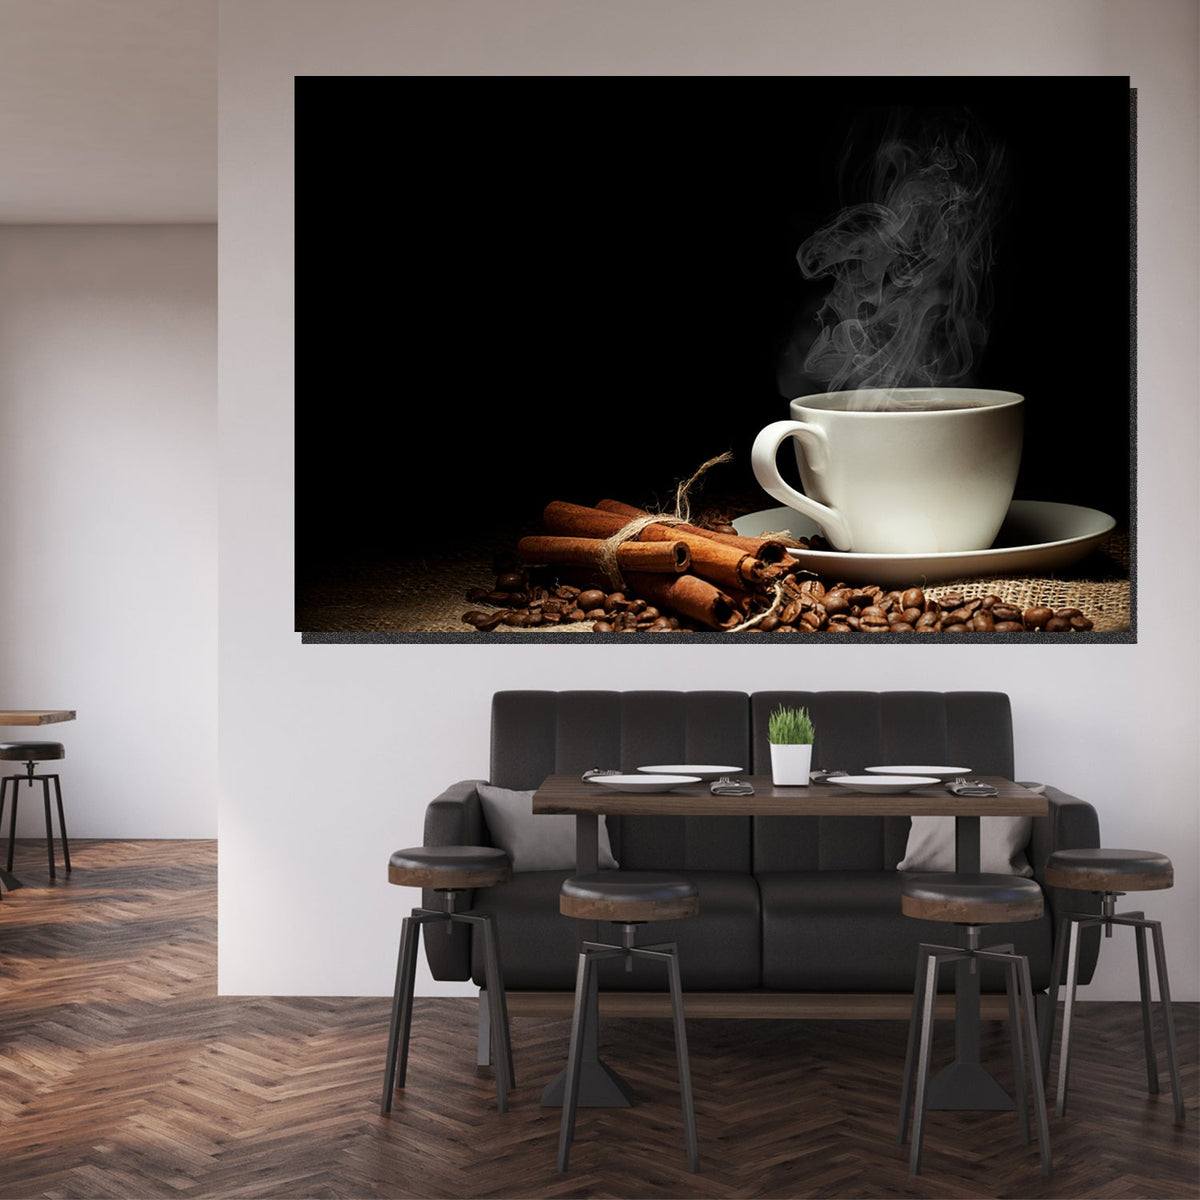 https://cdn.shopify.com/s/files/1/0387/9986/8044/products/CoffeeAddictionCanvasArtprintStretched-1.jpg